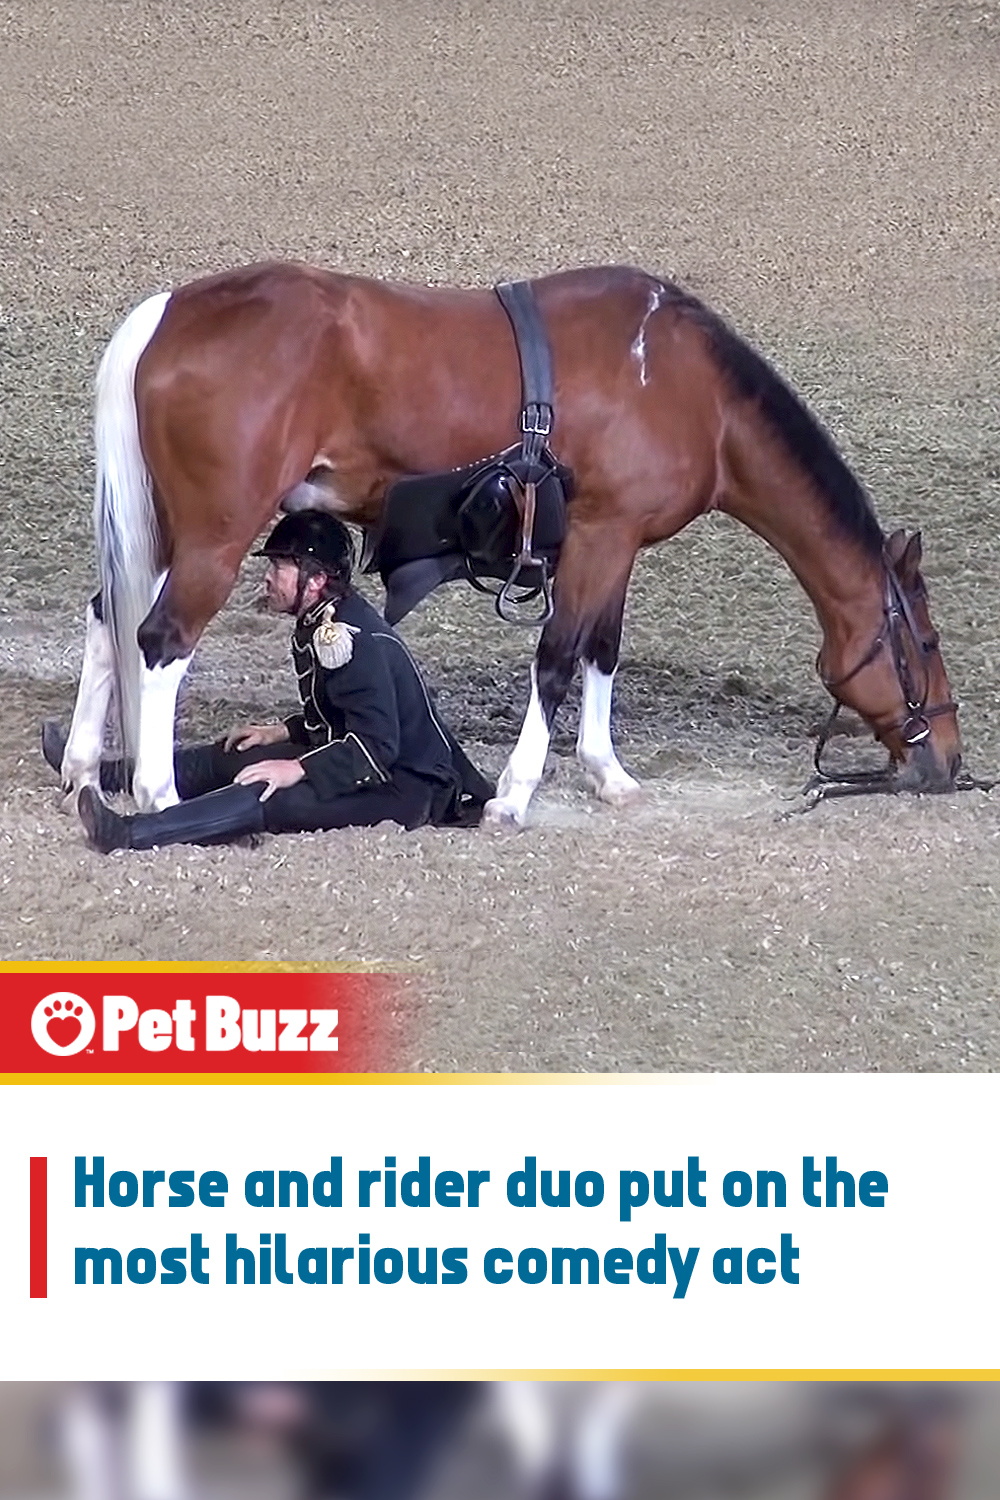 Horse and rider duo put on the most hilarious comedy act